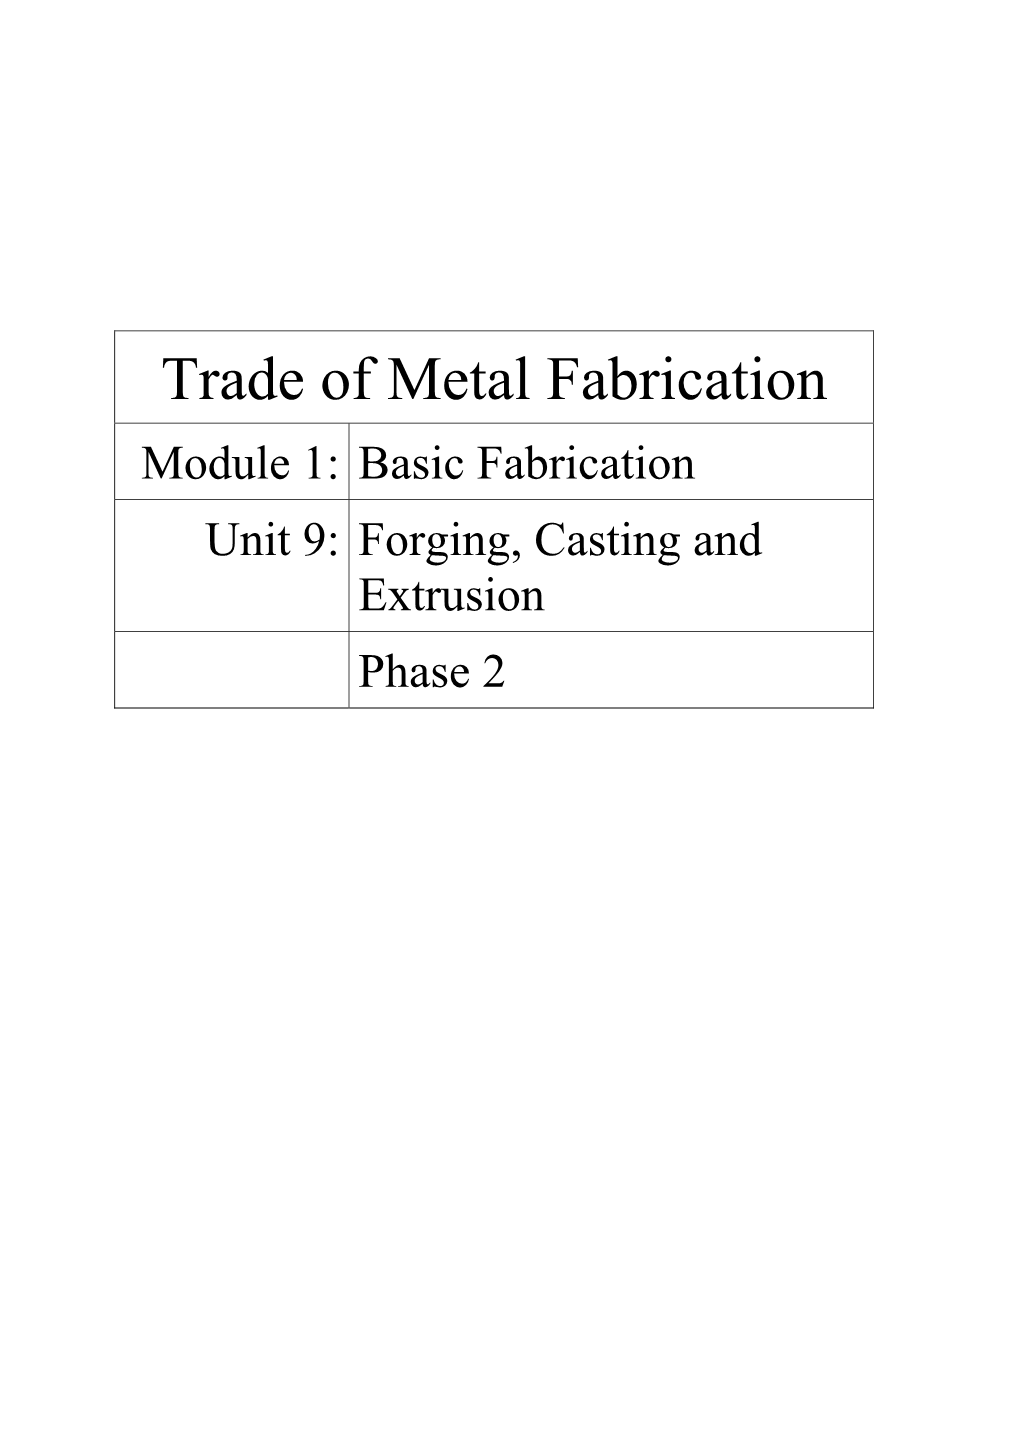 Trade of Metal Fabrication Module 1: Basic Fabrication Unit 9: Forging, Casting and Extrusion Phase 2